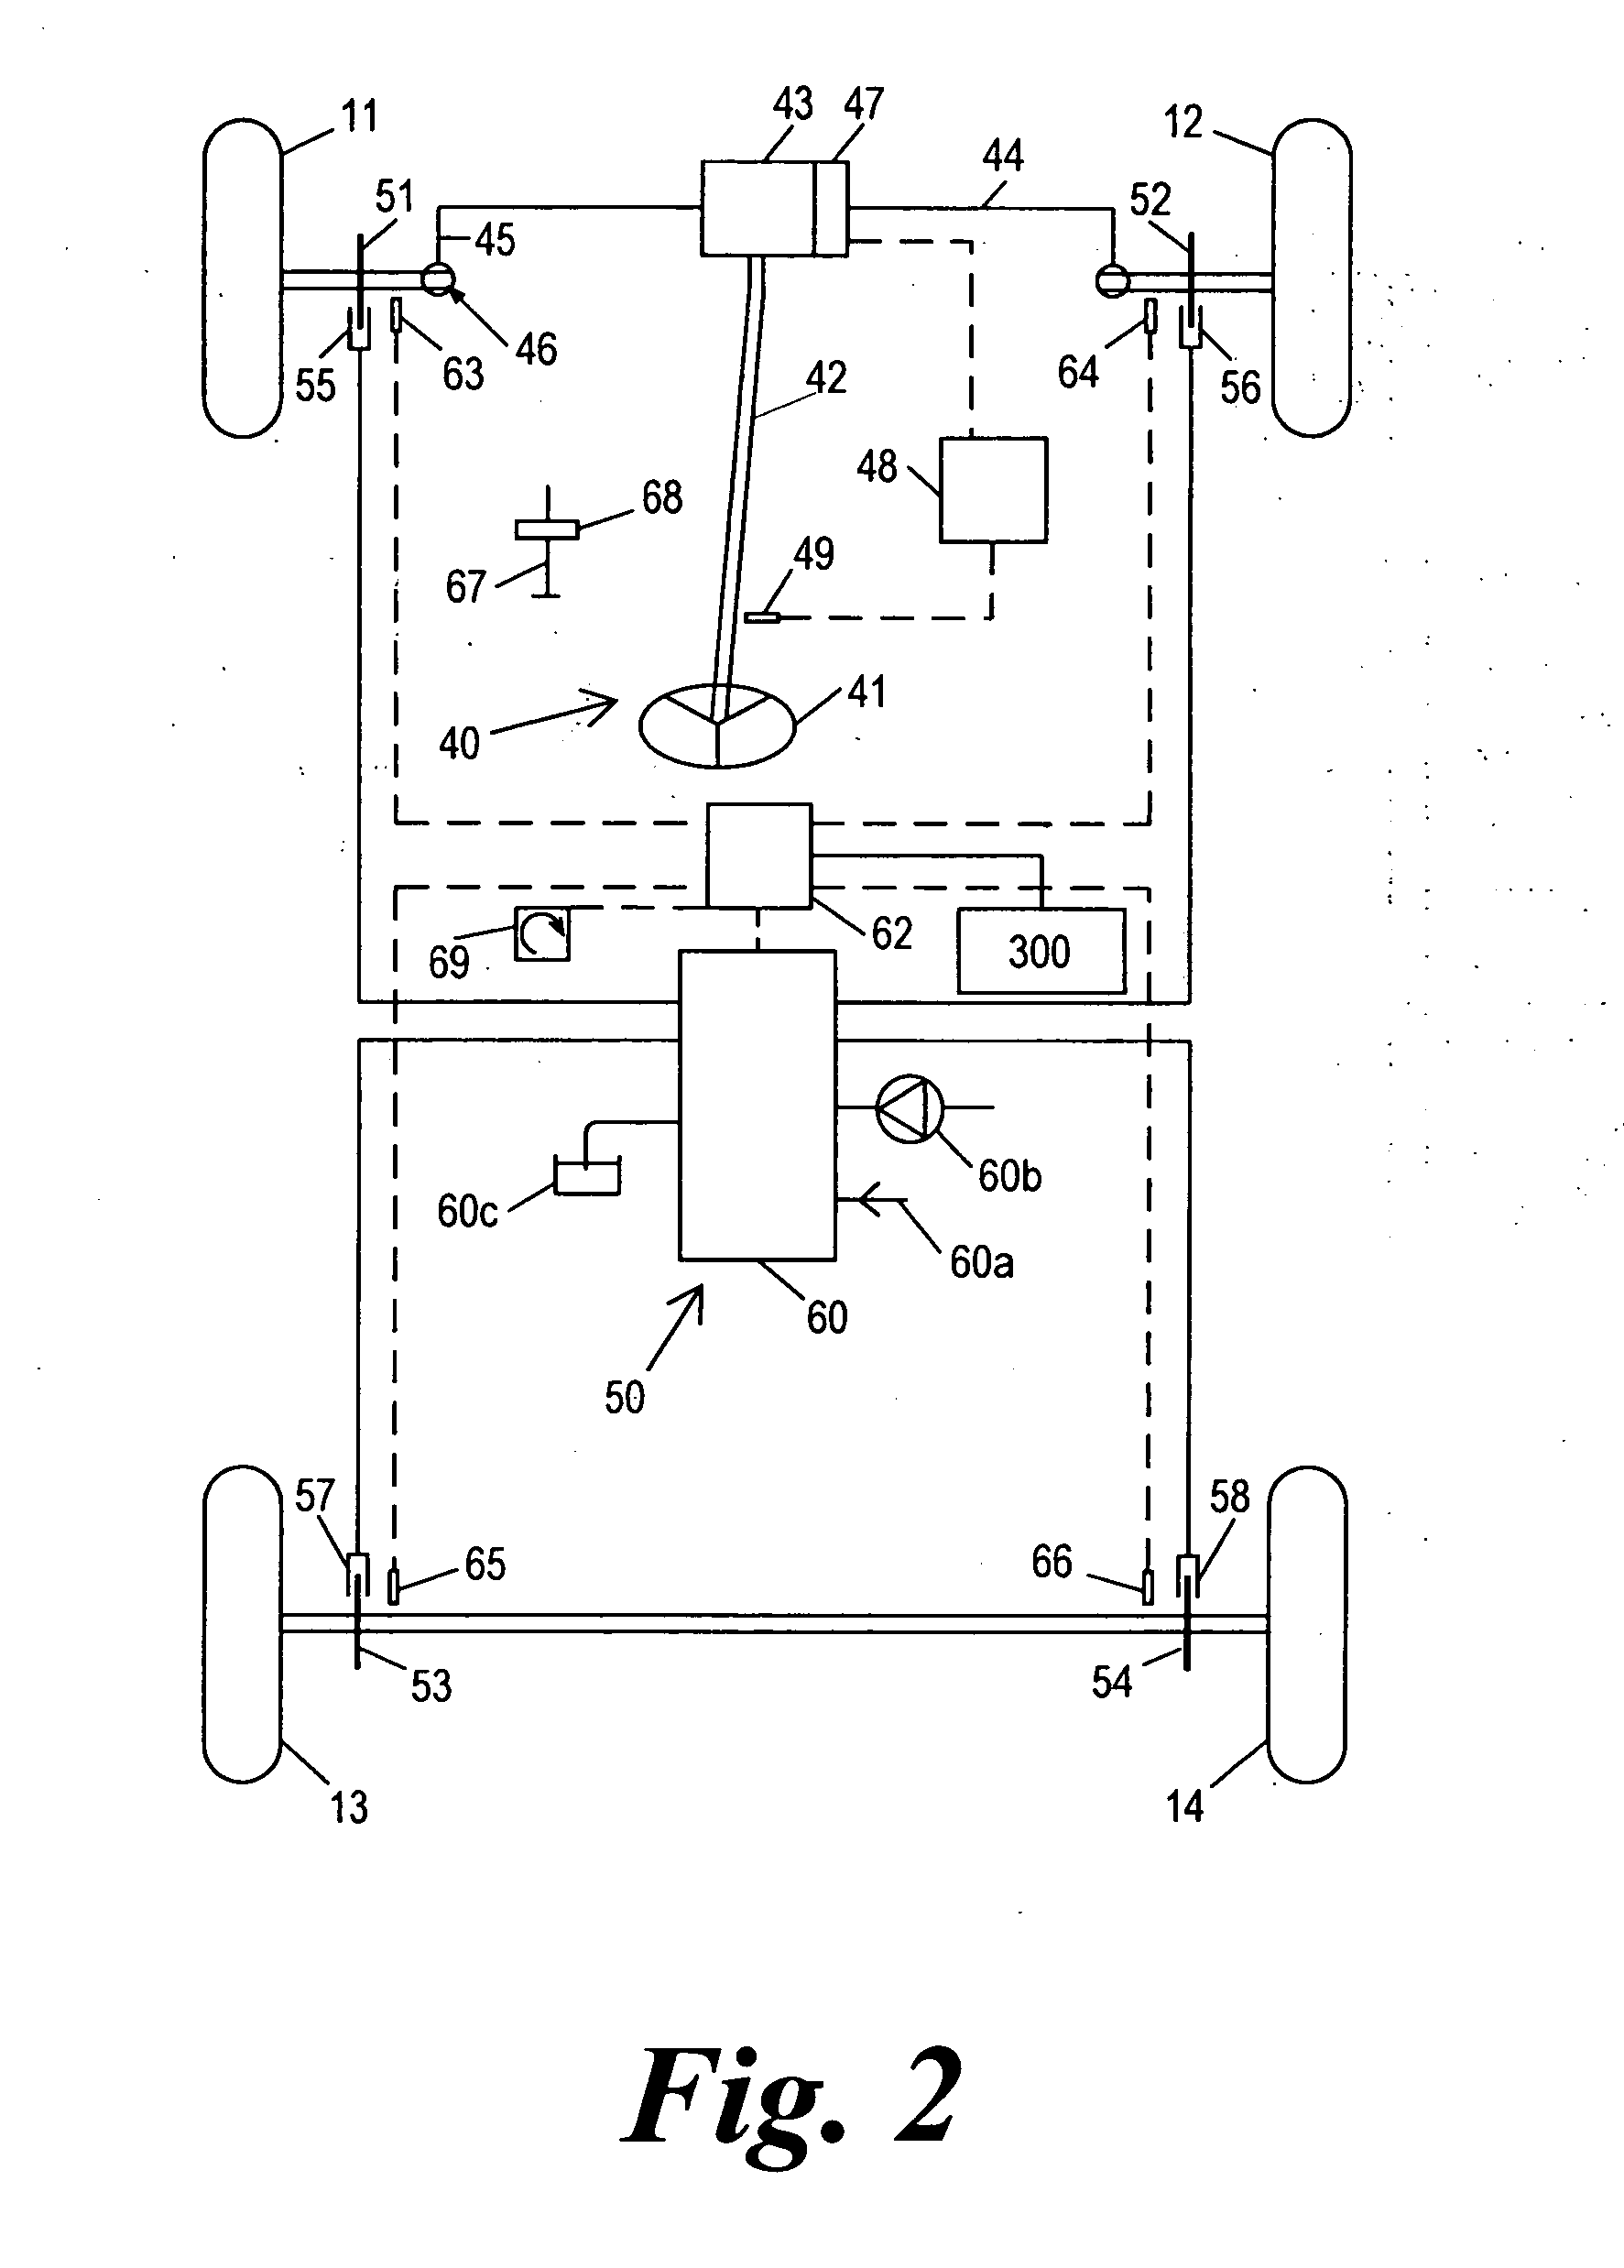 Vehicle control method and apparatus